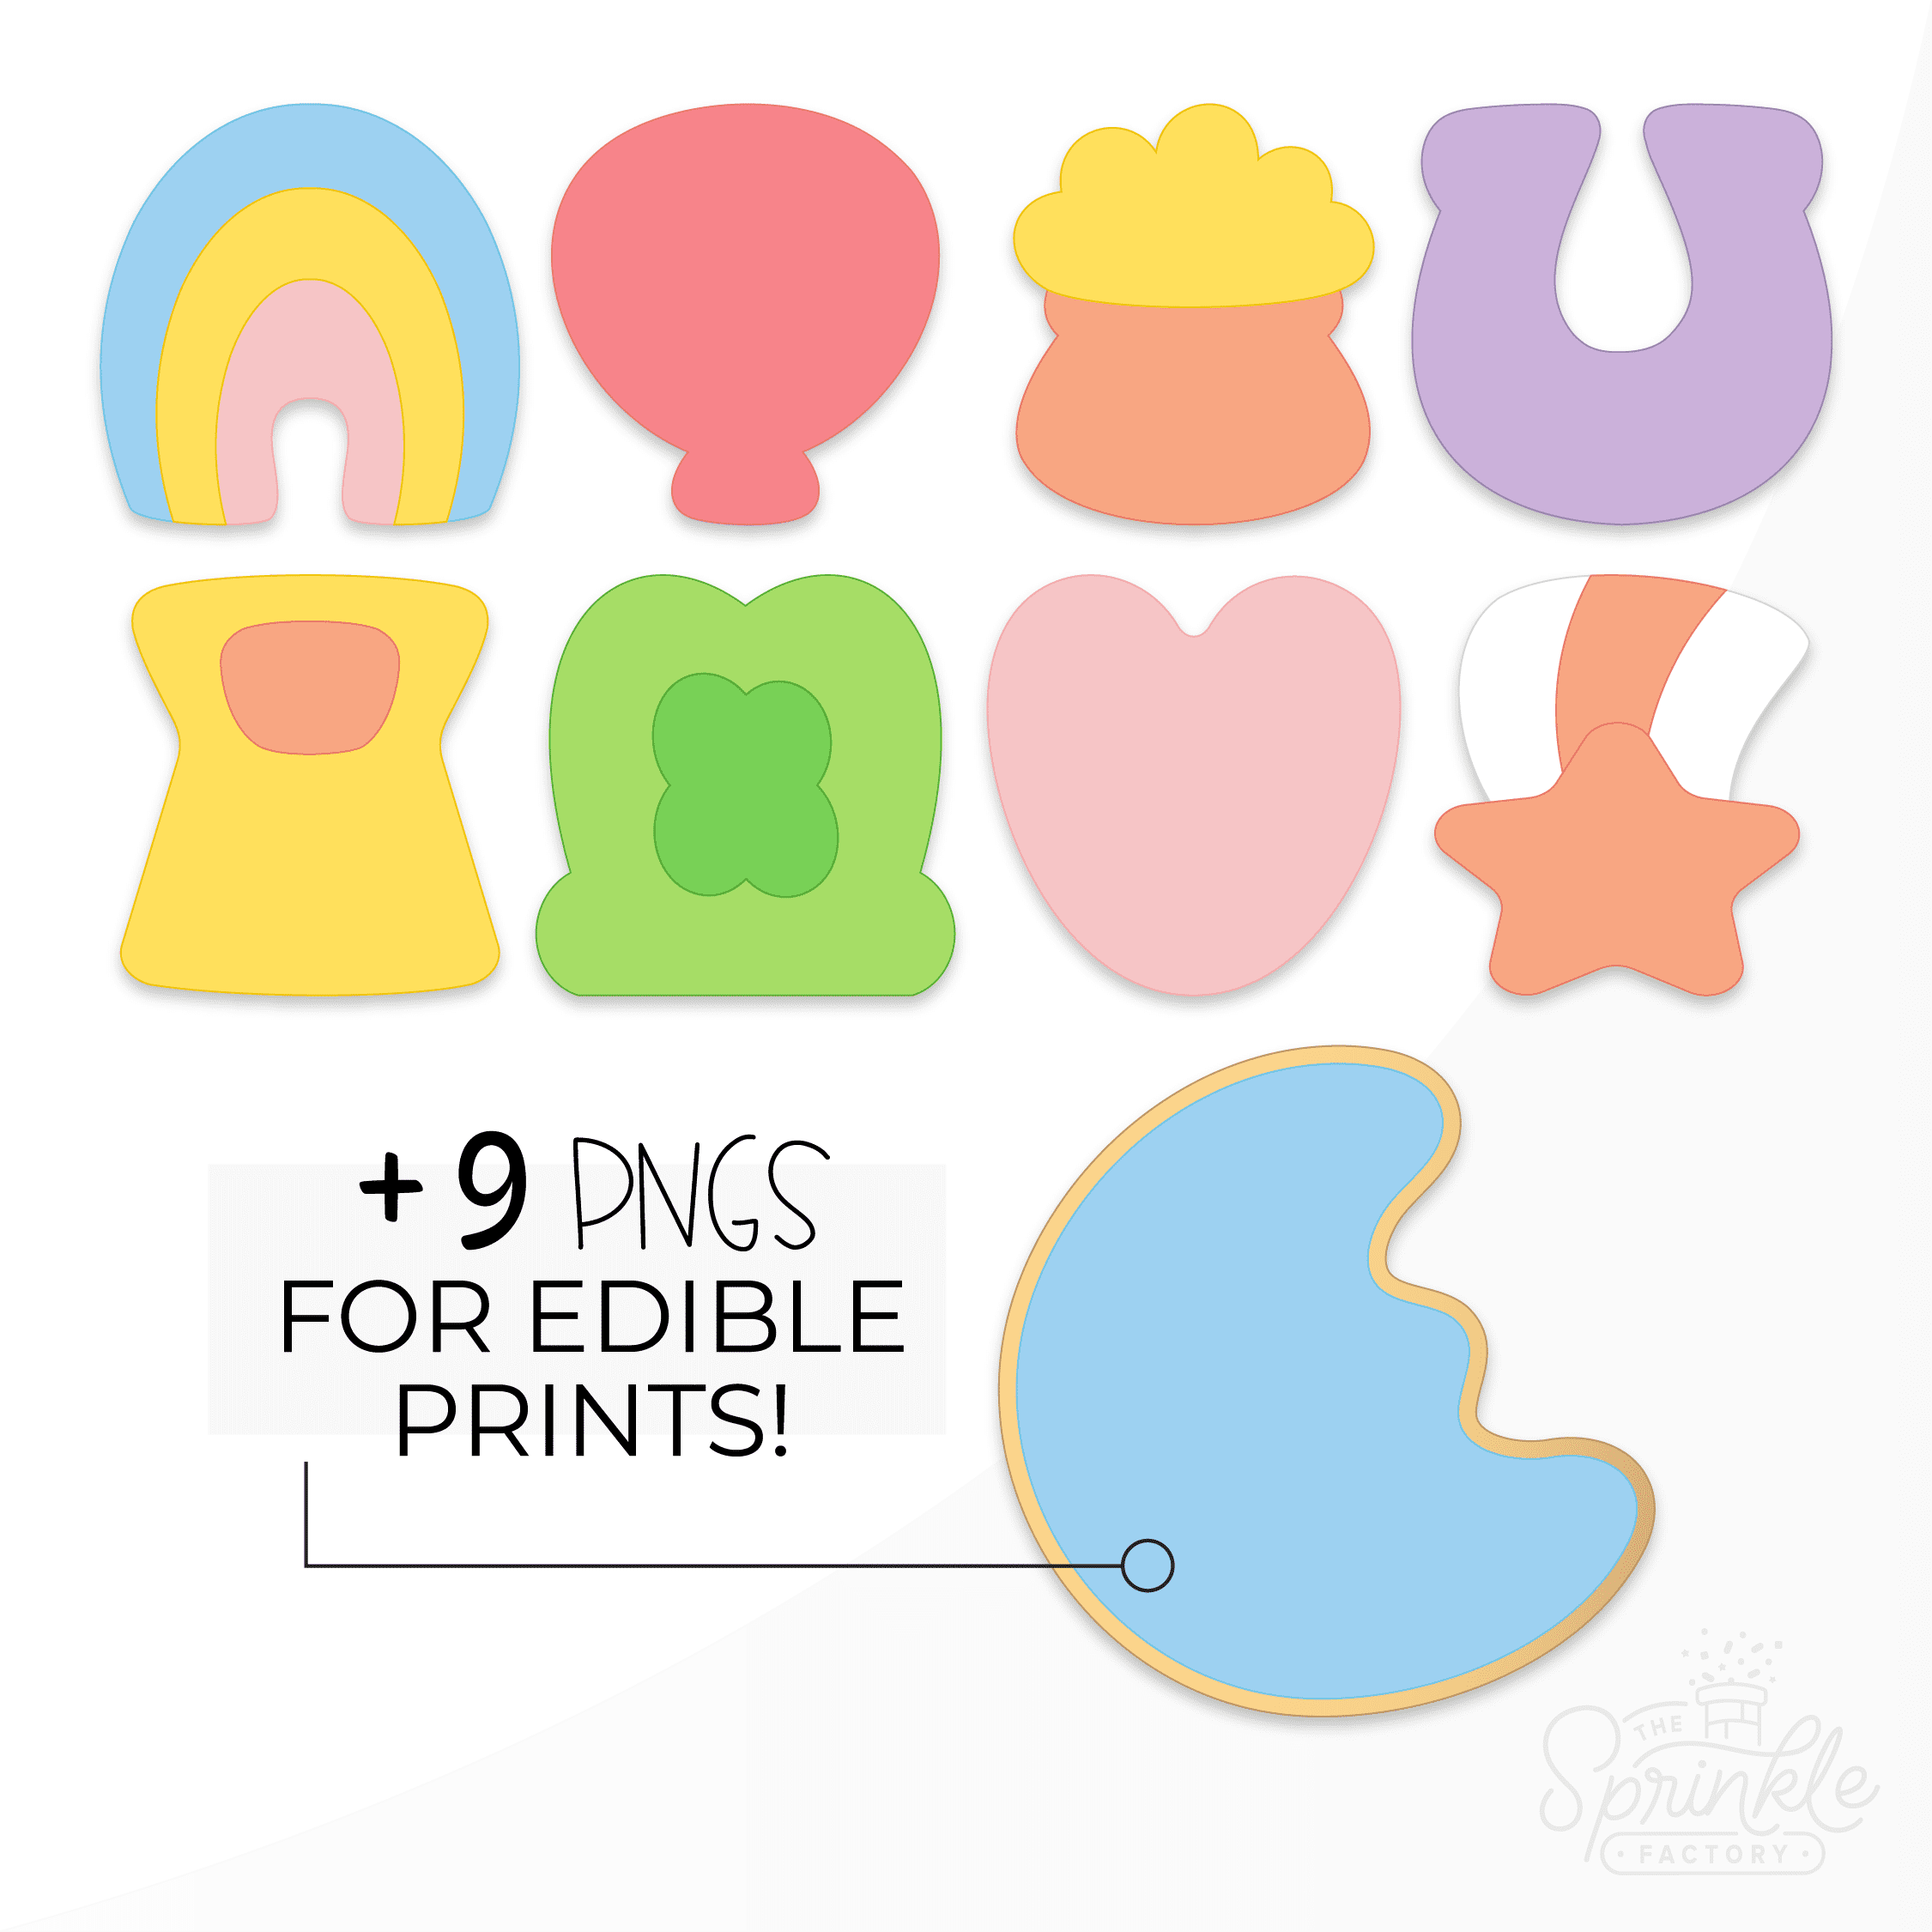 Clipart of 9 marshmallow cereal charms: blue/yellow/prink rainbow, red balloon, orange/yellow pot of gold, yellow/orange hour glass, green hat with shamrock, pink heart, purple horseshoe, white/orange shooting star and a blue moon on top of a cookie showing the edible prints.